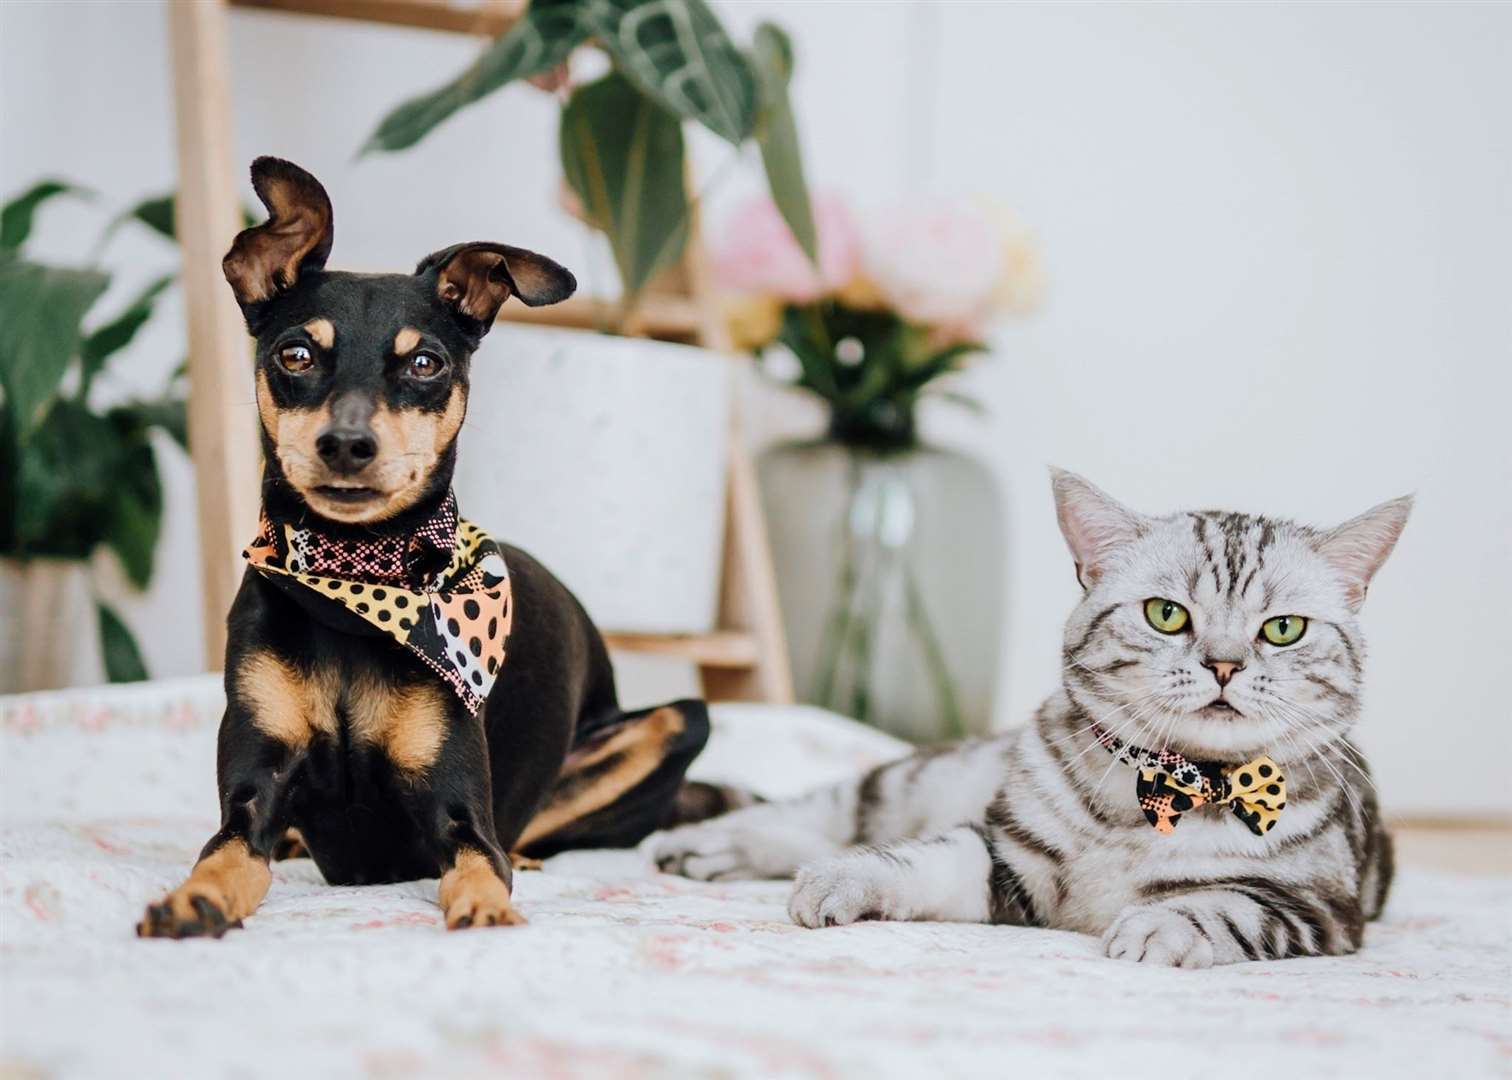 The relationship between a cat and dog is dependent on the character of the animals and the manner in which the two are introduced. Stock image